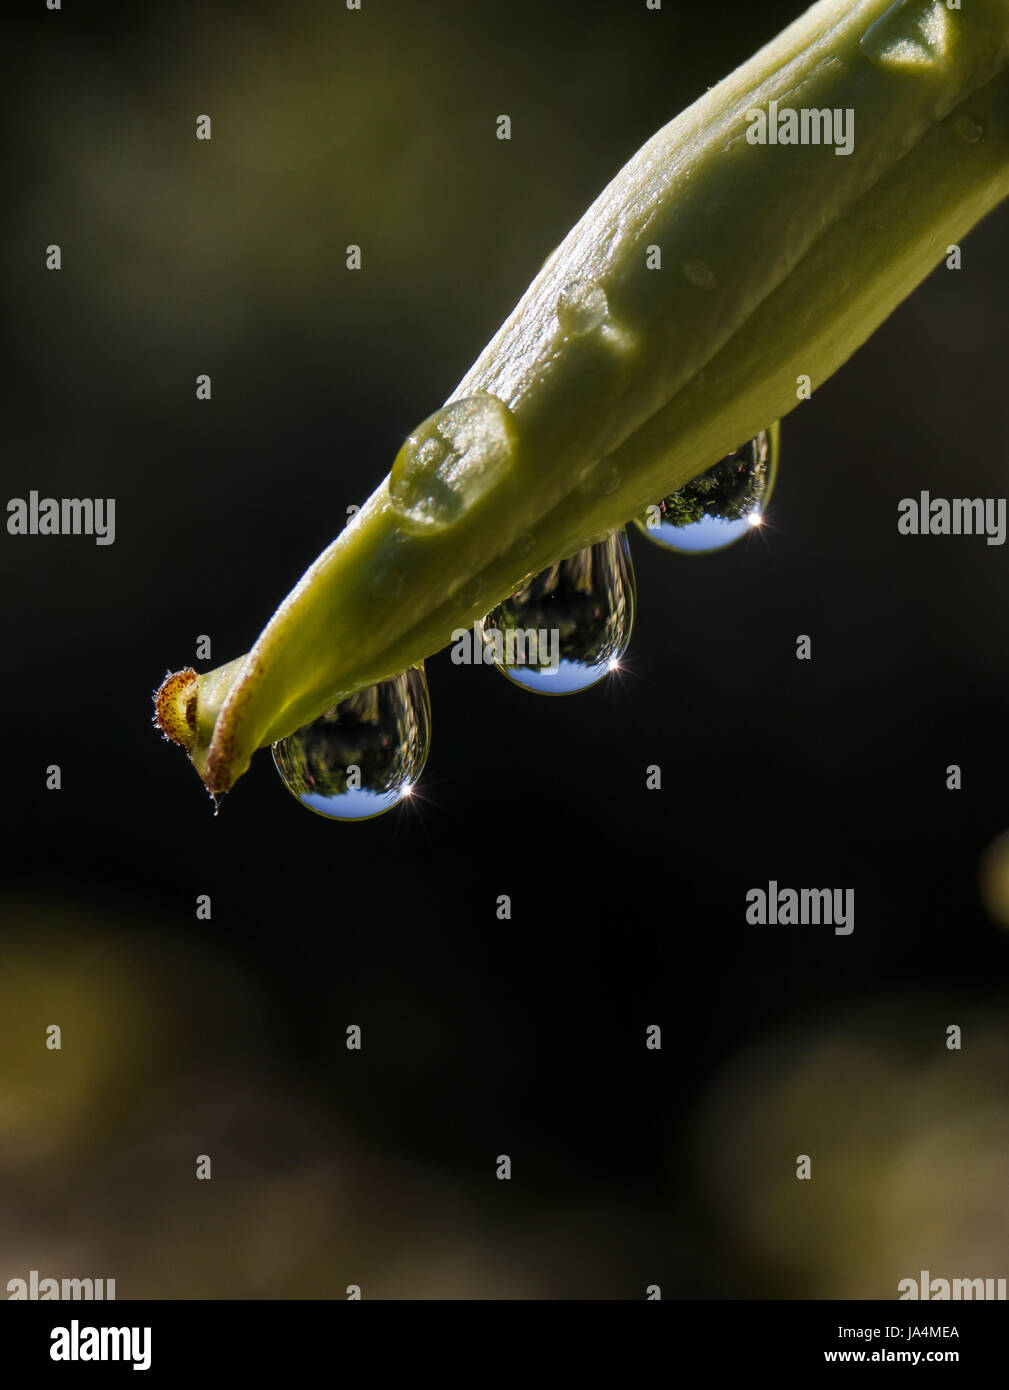 raindrop, bud, wet, refraction, graphic, conspicuous, pictographic, Stock Photo